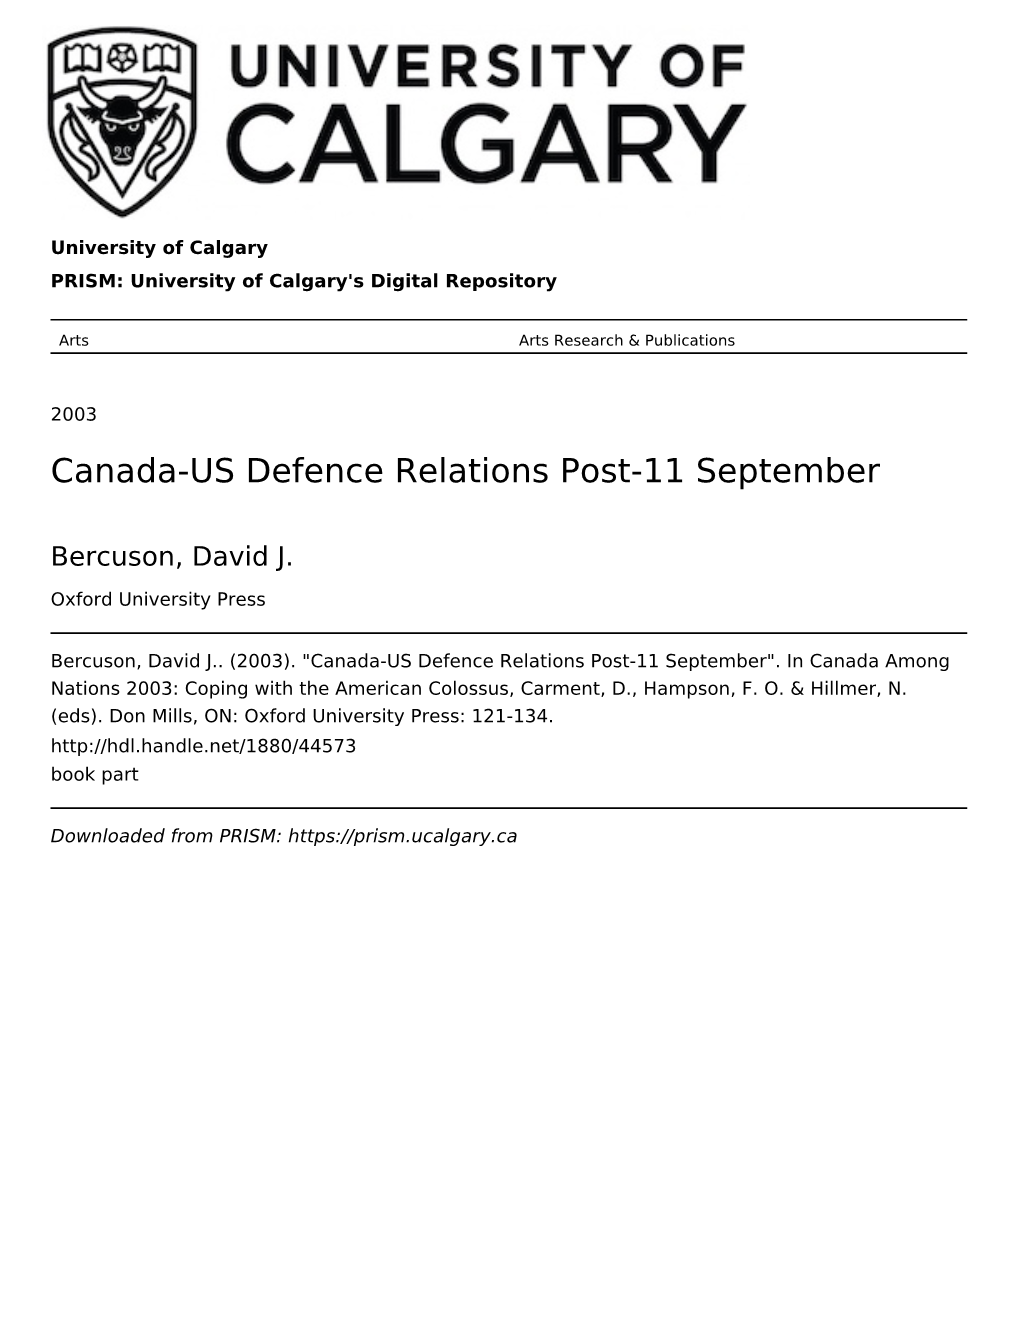 Canada-US Defence Relations Post-11 September